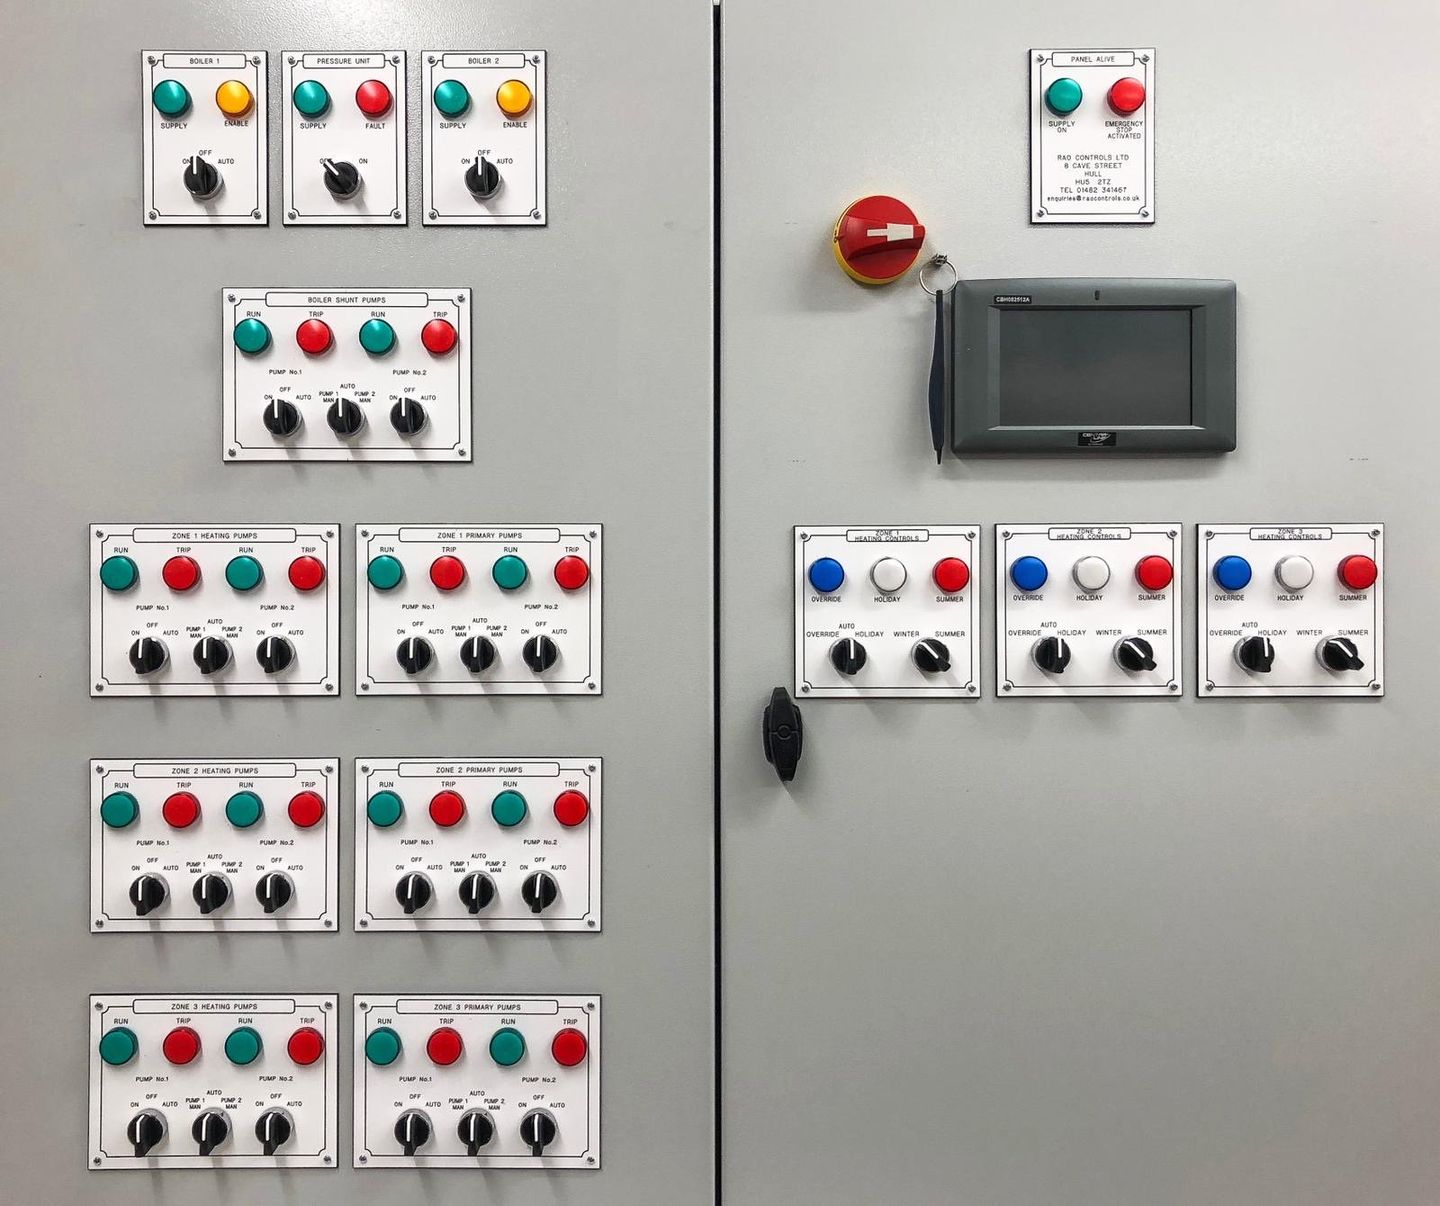 Design, supply and installation of control panels